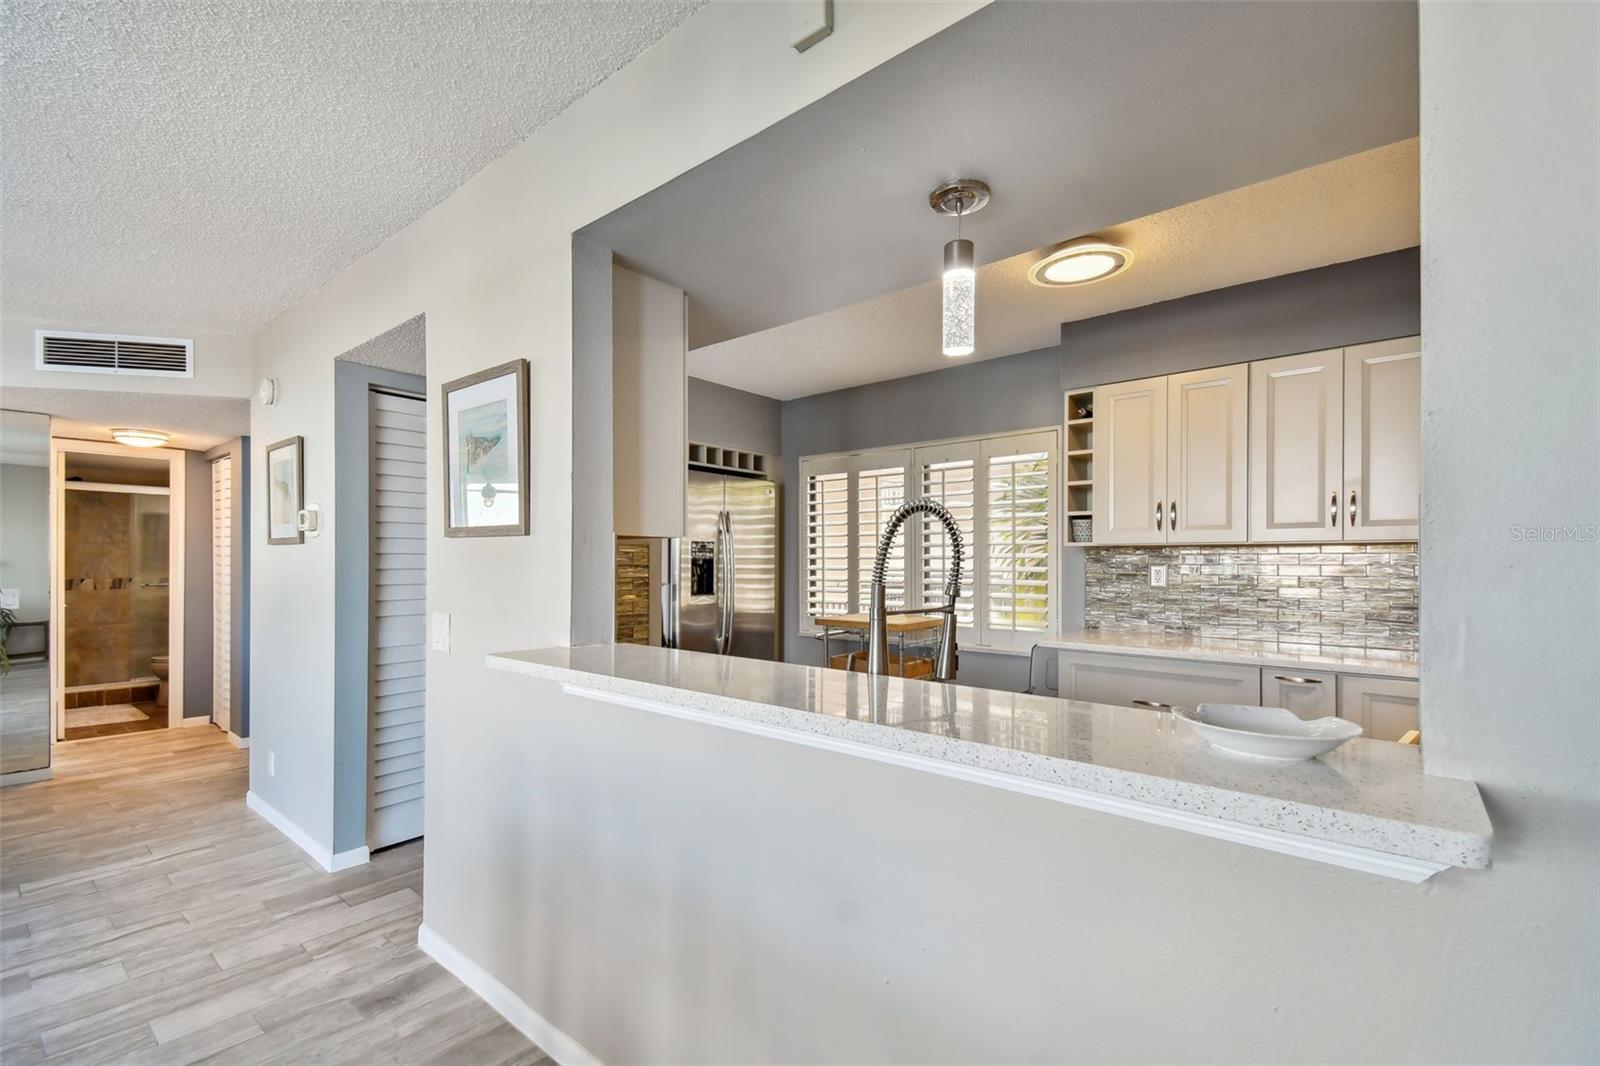 Newly remodeled kitchen features all the modern convenience including stainless steel appliances throughout